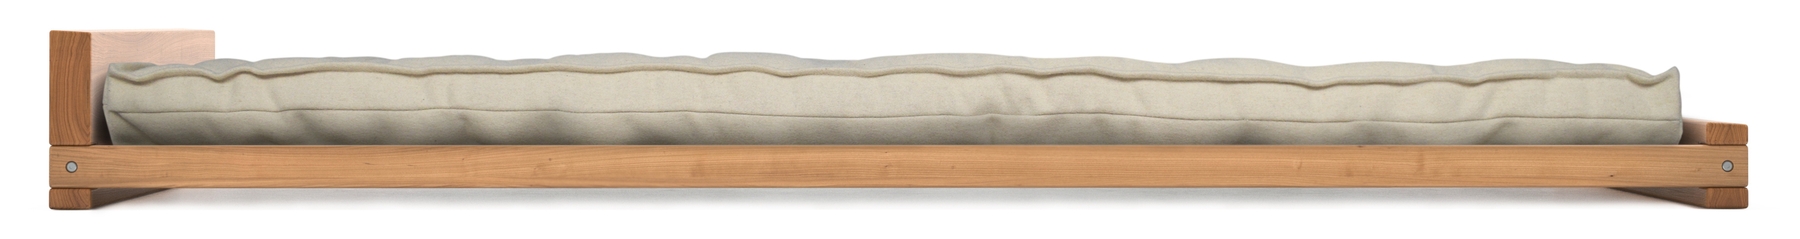 Solid wood platform bed with wool mattress